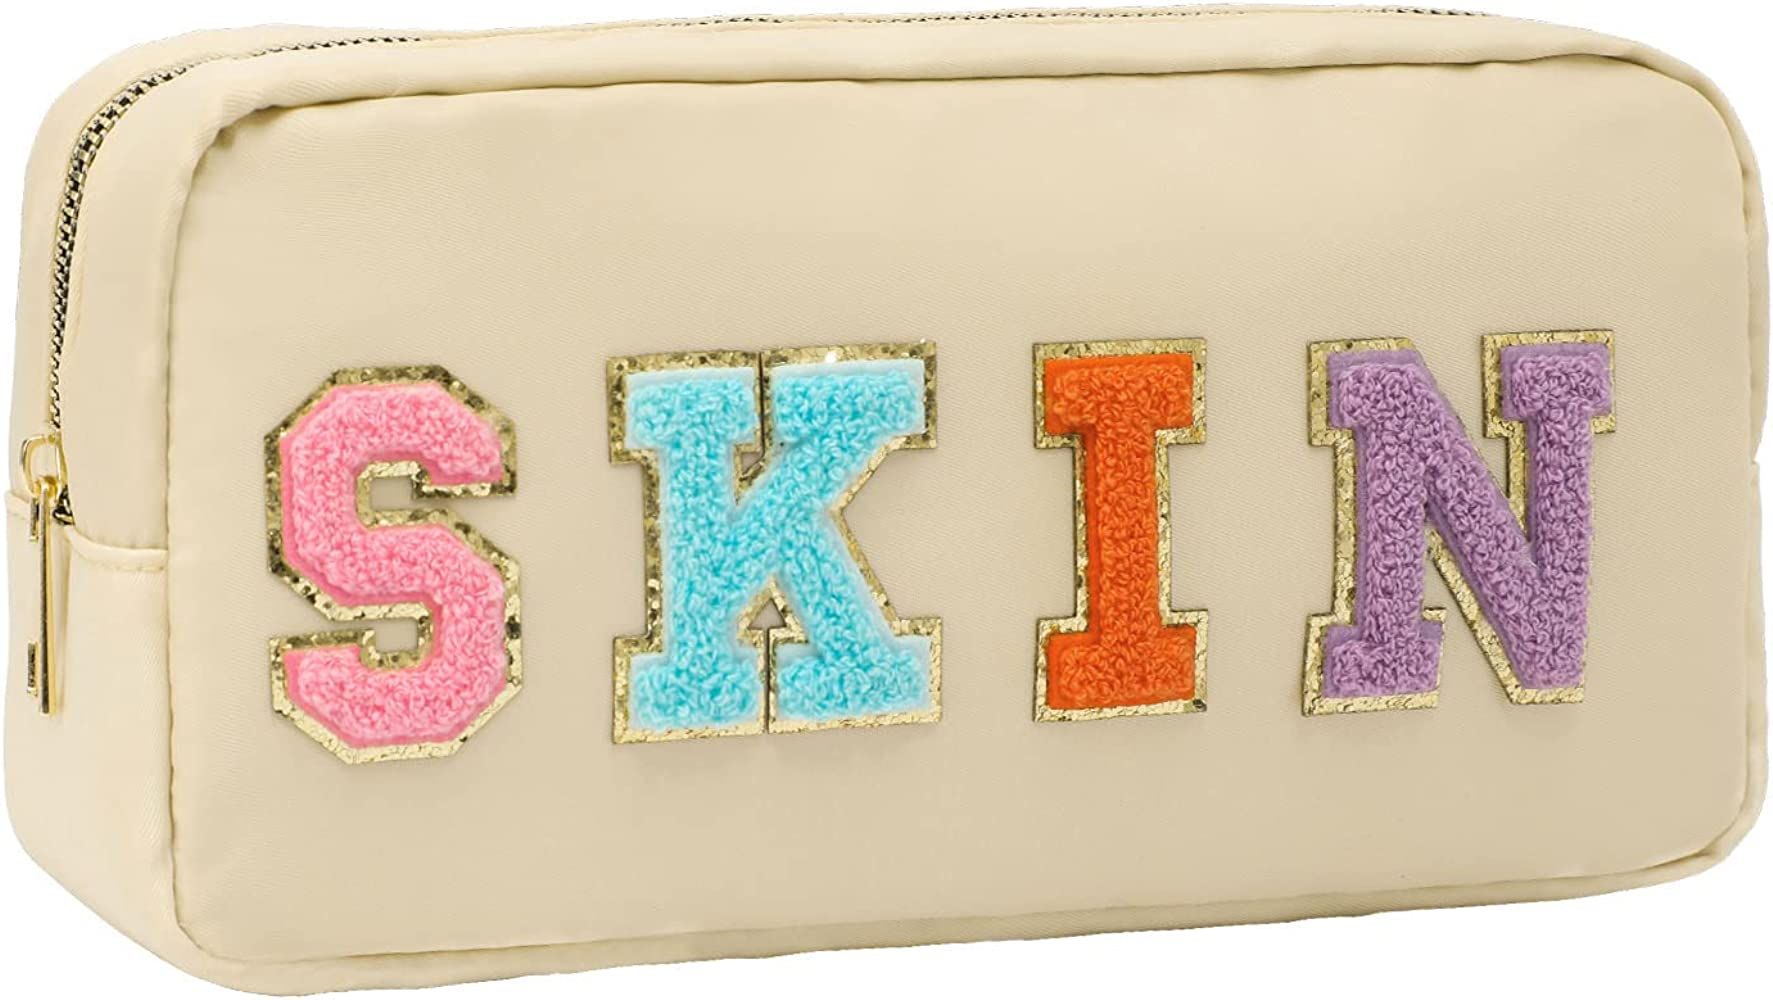 DYSHAYEN Nylon Cosmetic Bag Small Travel Makeup Pouch Bag for Women Girls with Chenille Letter Patch | Amazon (US)